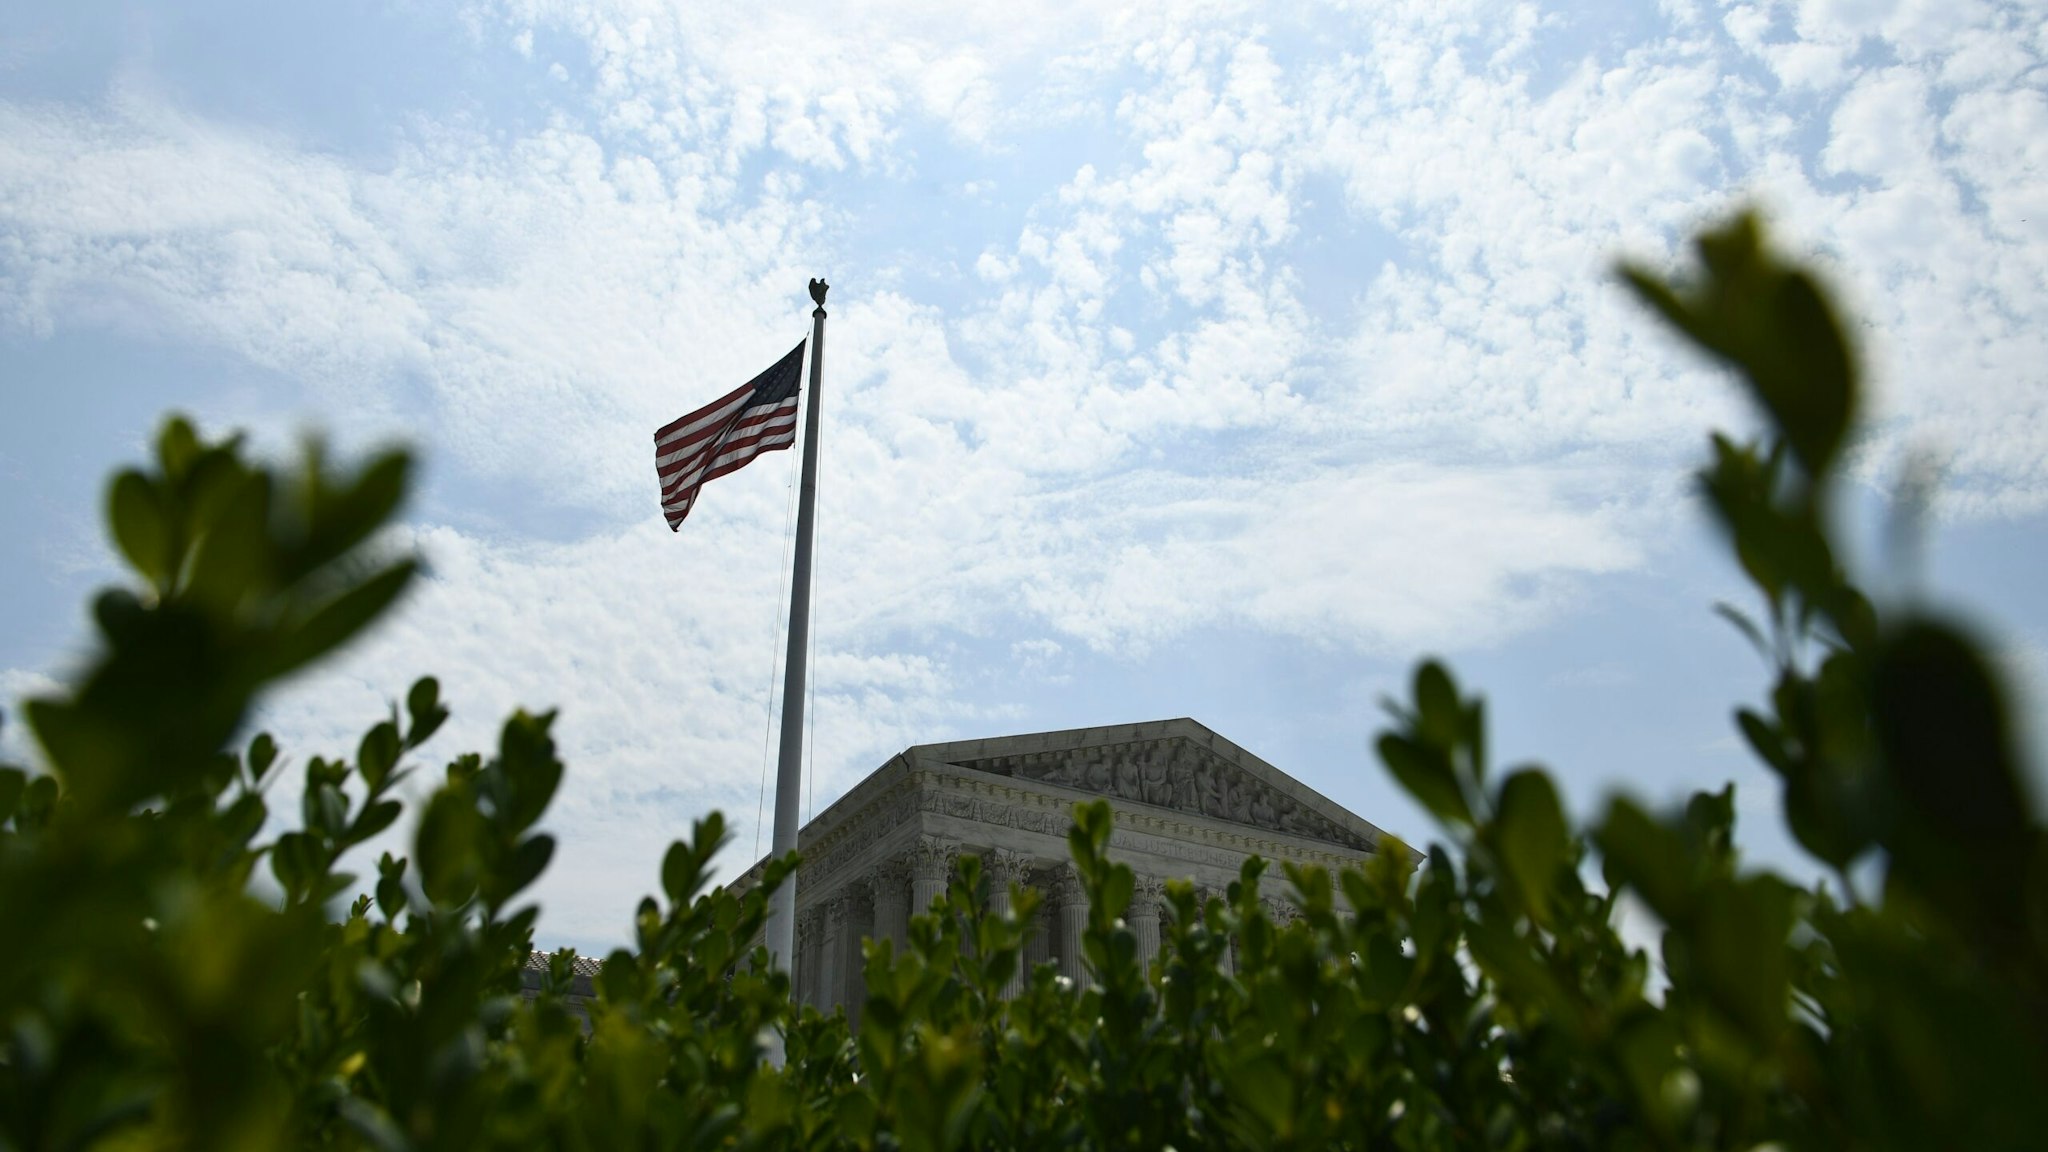 The US Supreme Court is viewed on July 6, 2020 in Washington, DC. - The Supreme Court issued a unanimous opinion on Monday that says states can require Electoral College voters to back the winner of their states popular vote in a presidential election. (Photo by Brendan Smialowski / AFP) (Photo by BRENDAN SMIALOWSKI/AFP via Getty Images)